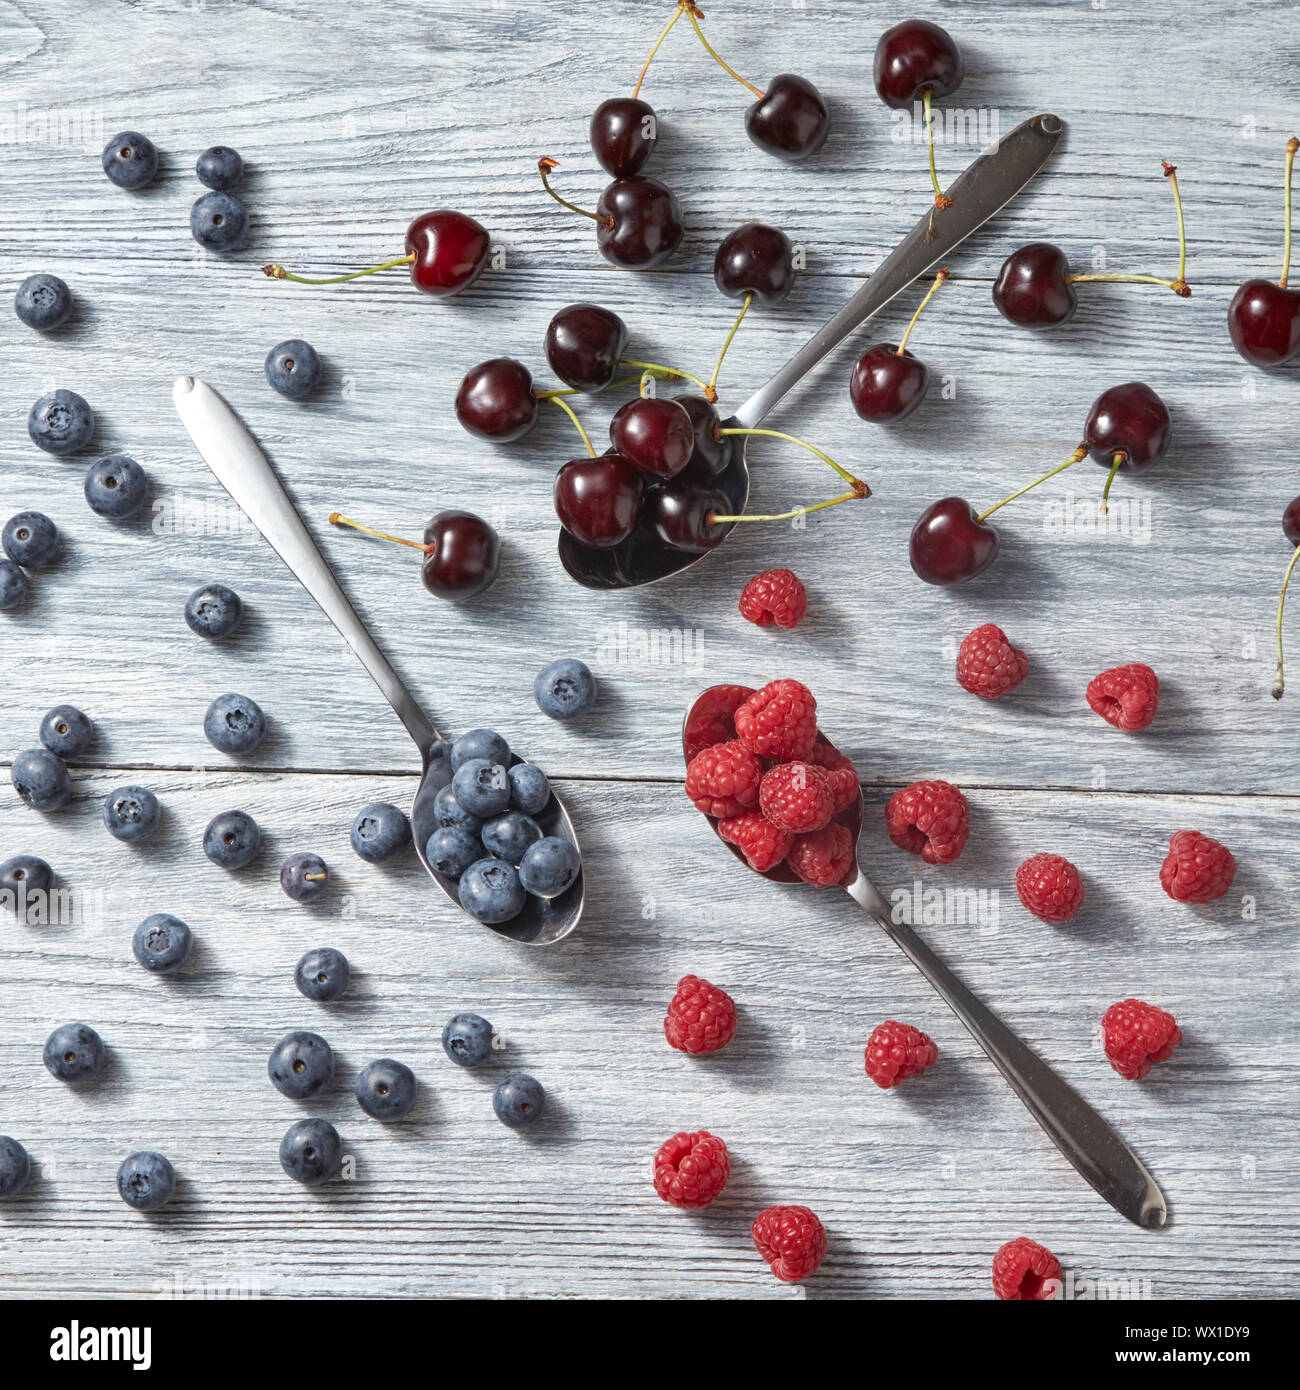 Mix of fresh organic berries pattern from blueberries, cherries, raspberries on a gray wooden background. Top view. Stock Photo